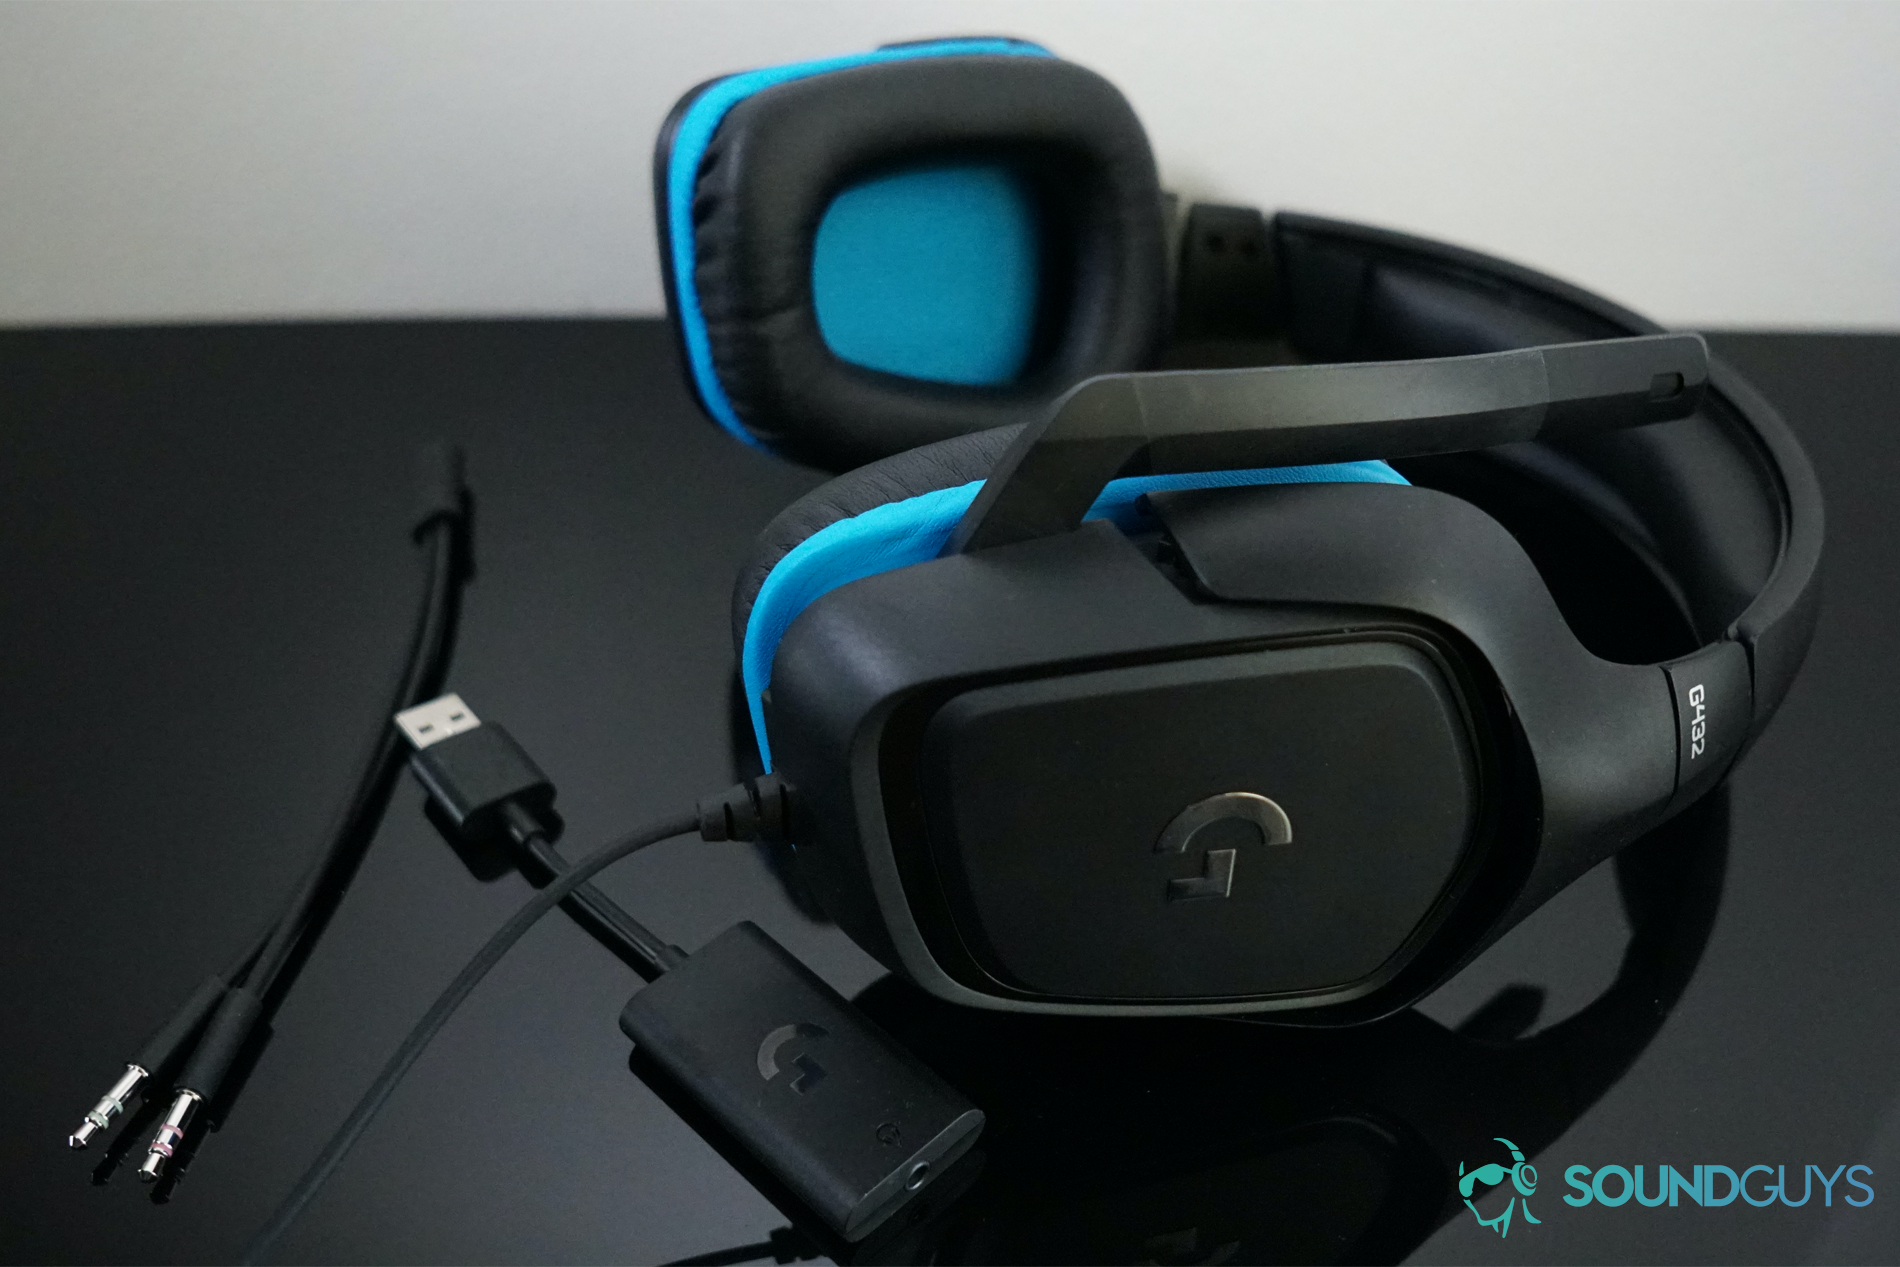 Casque Micro Gamer Logitech G432 PC, PlayStation 4, Xbox One et mobiles